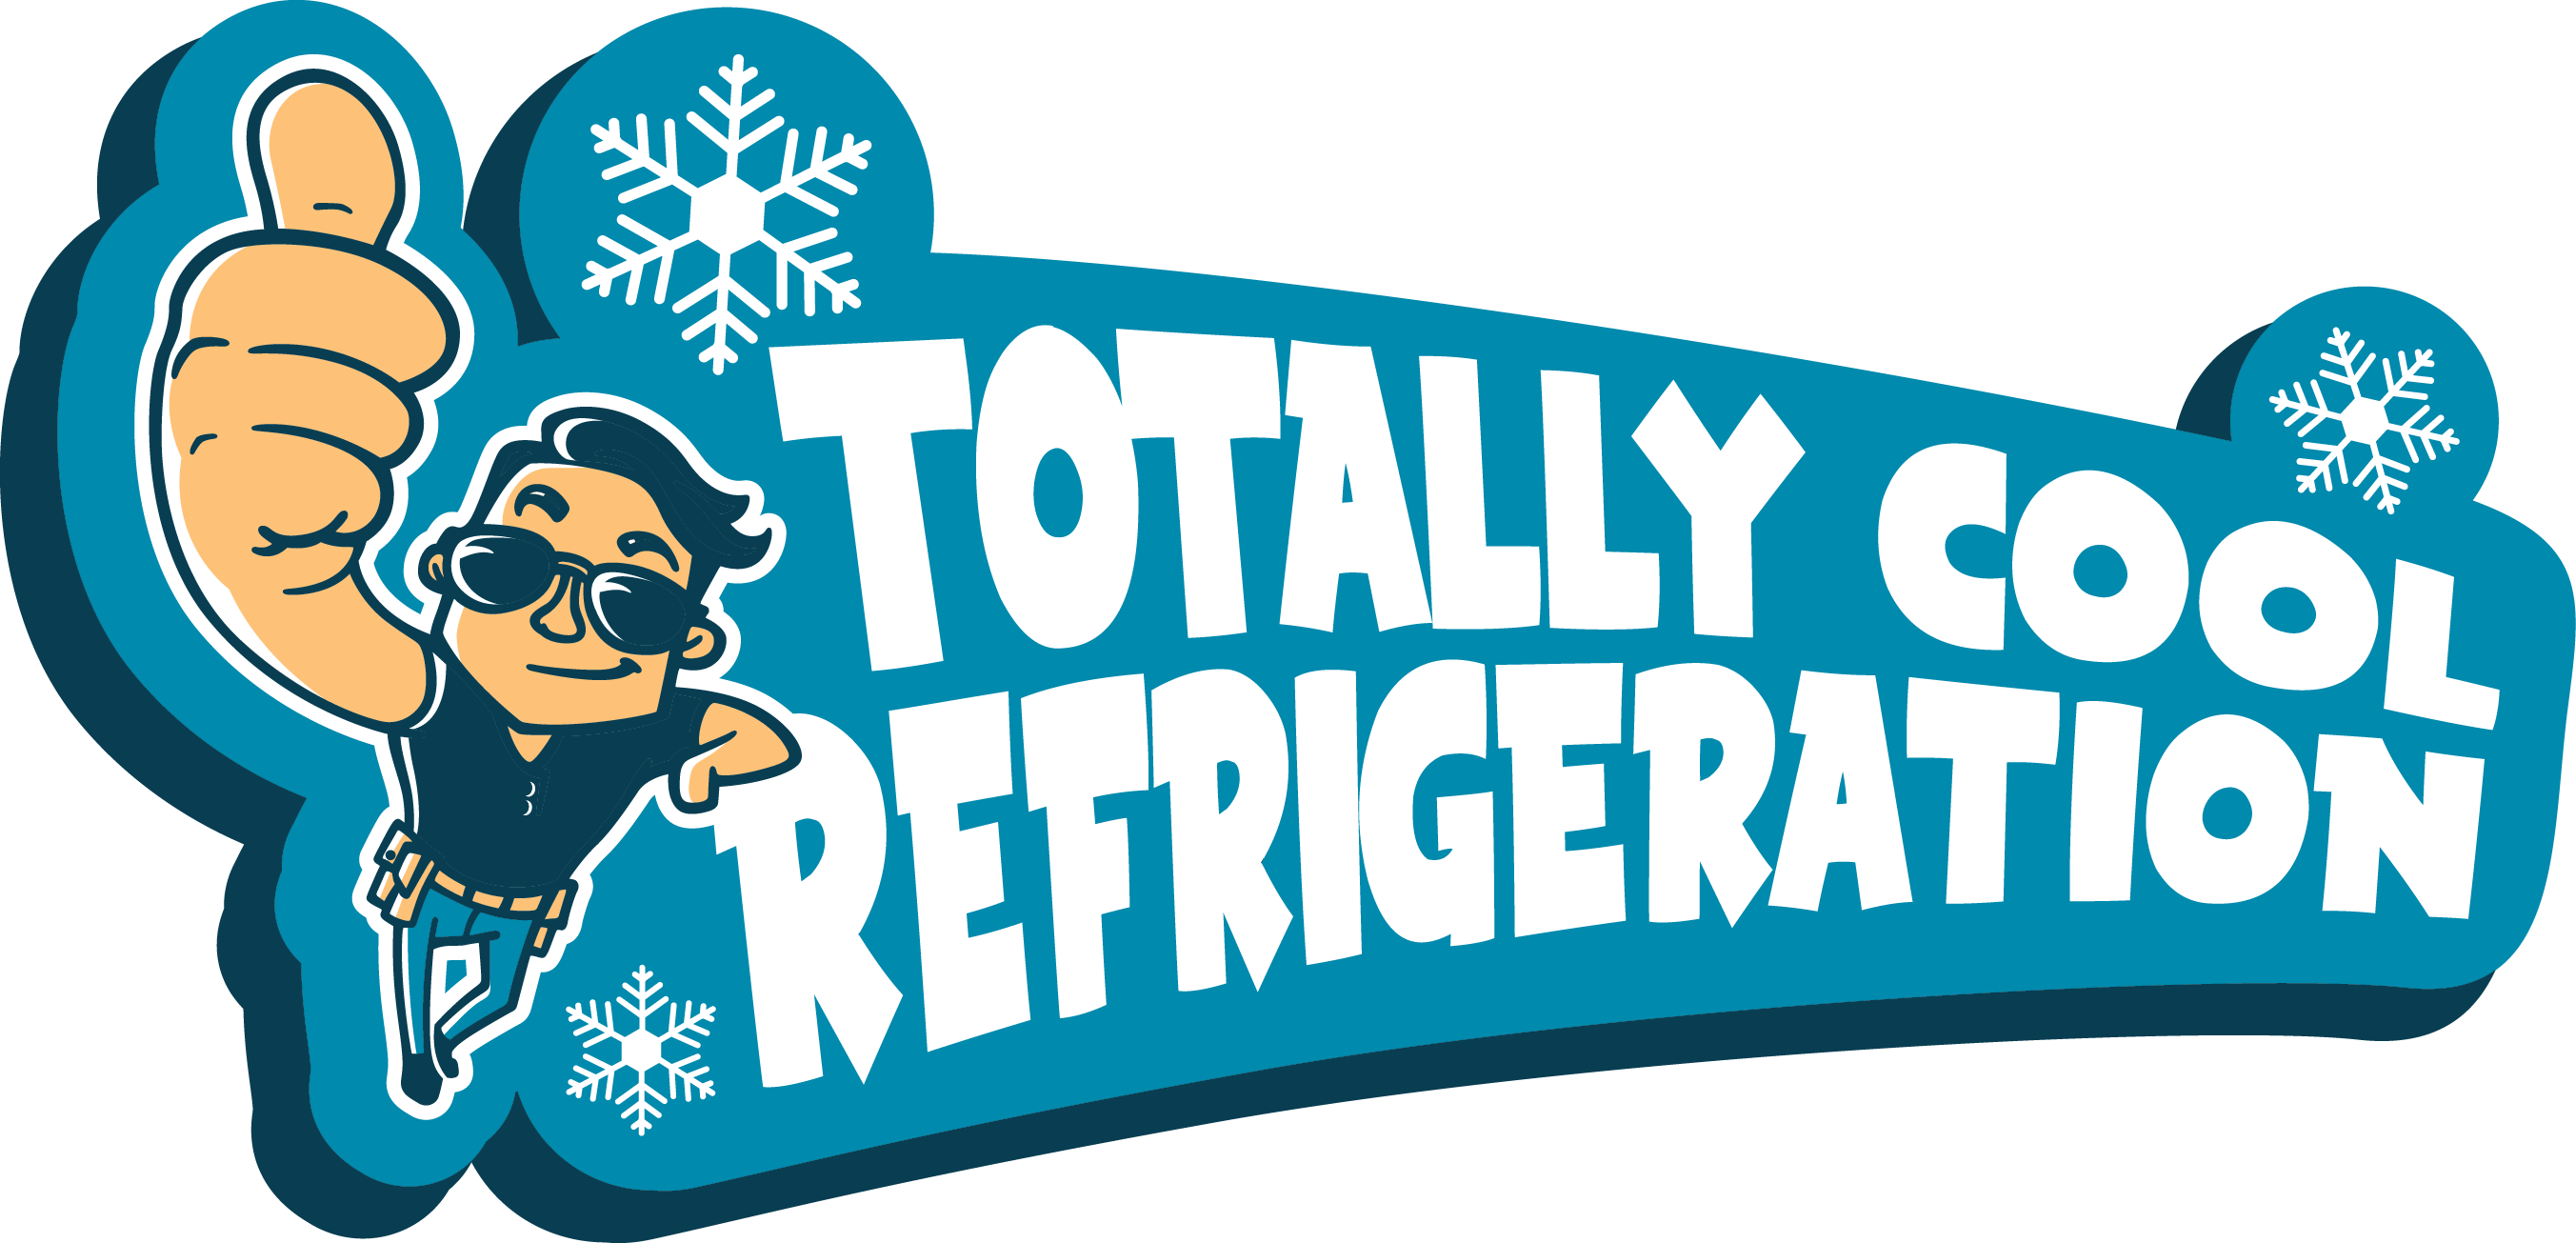 Totally Cool Refrigeration Logo